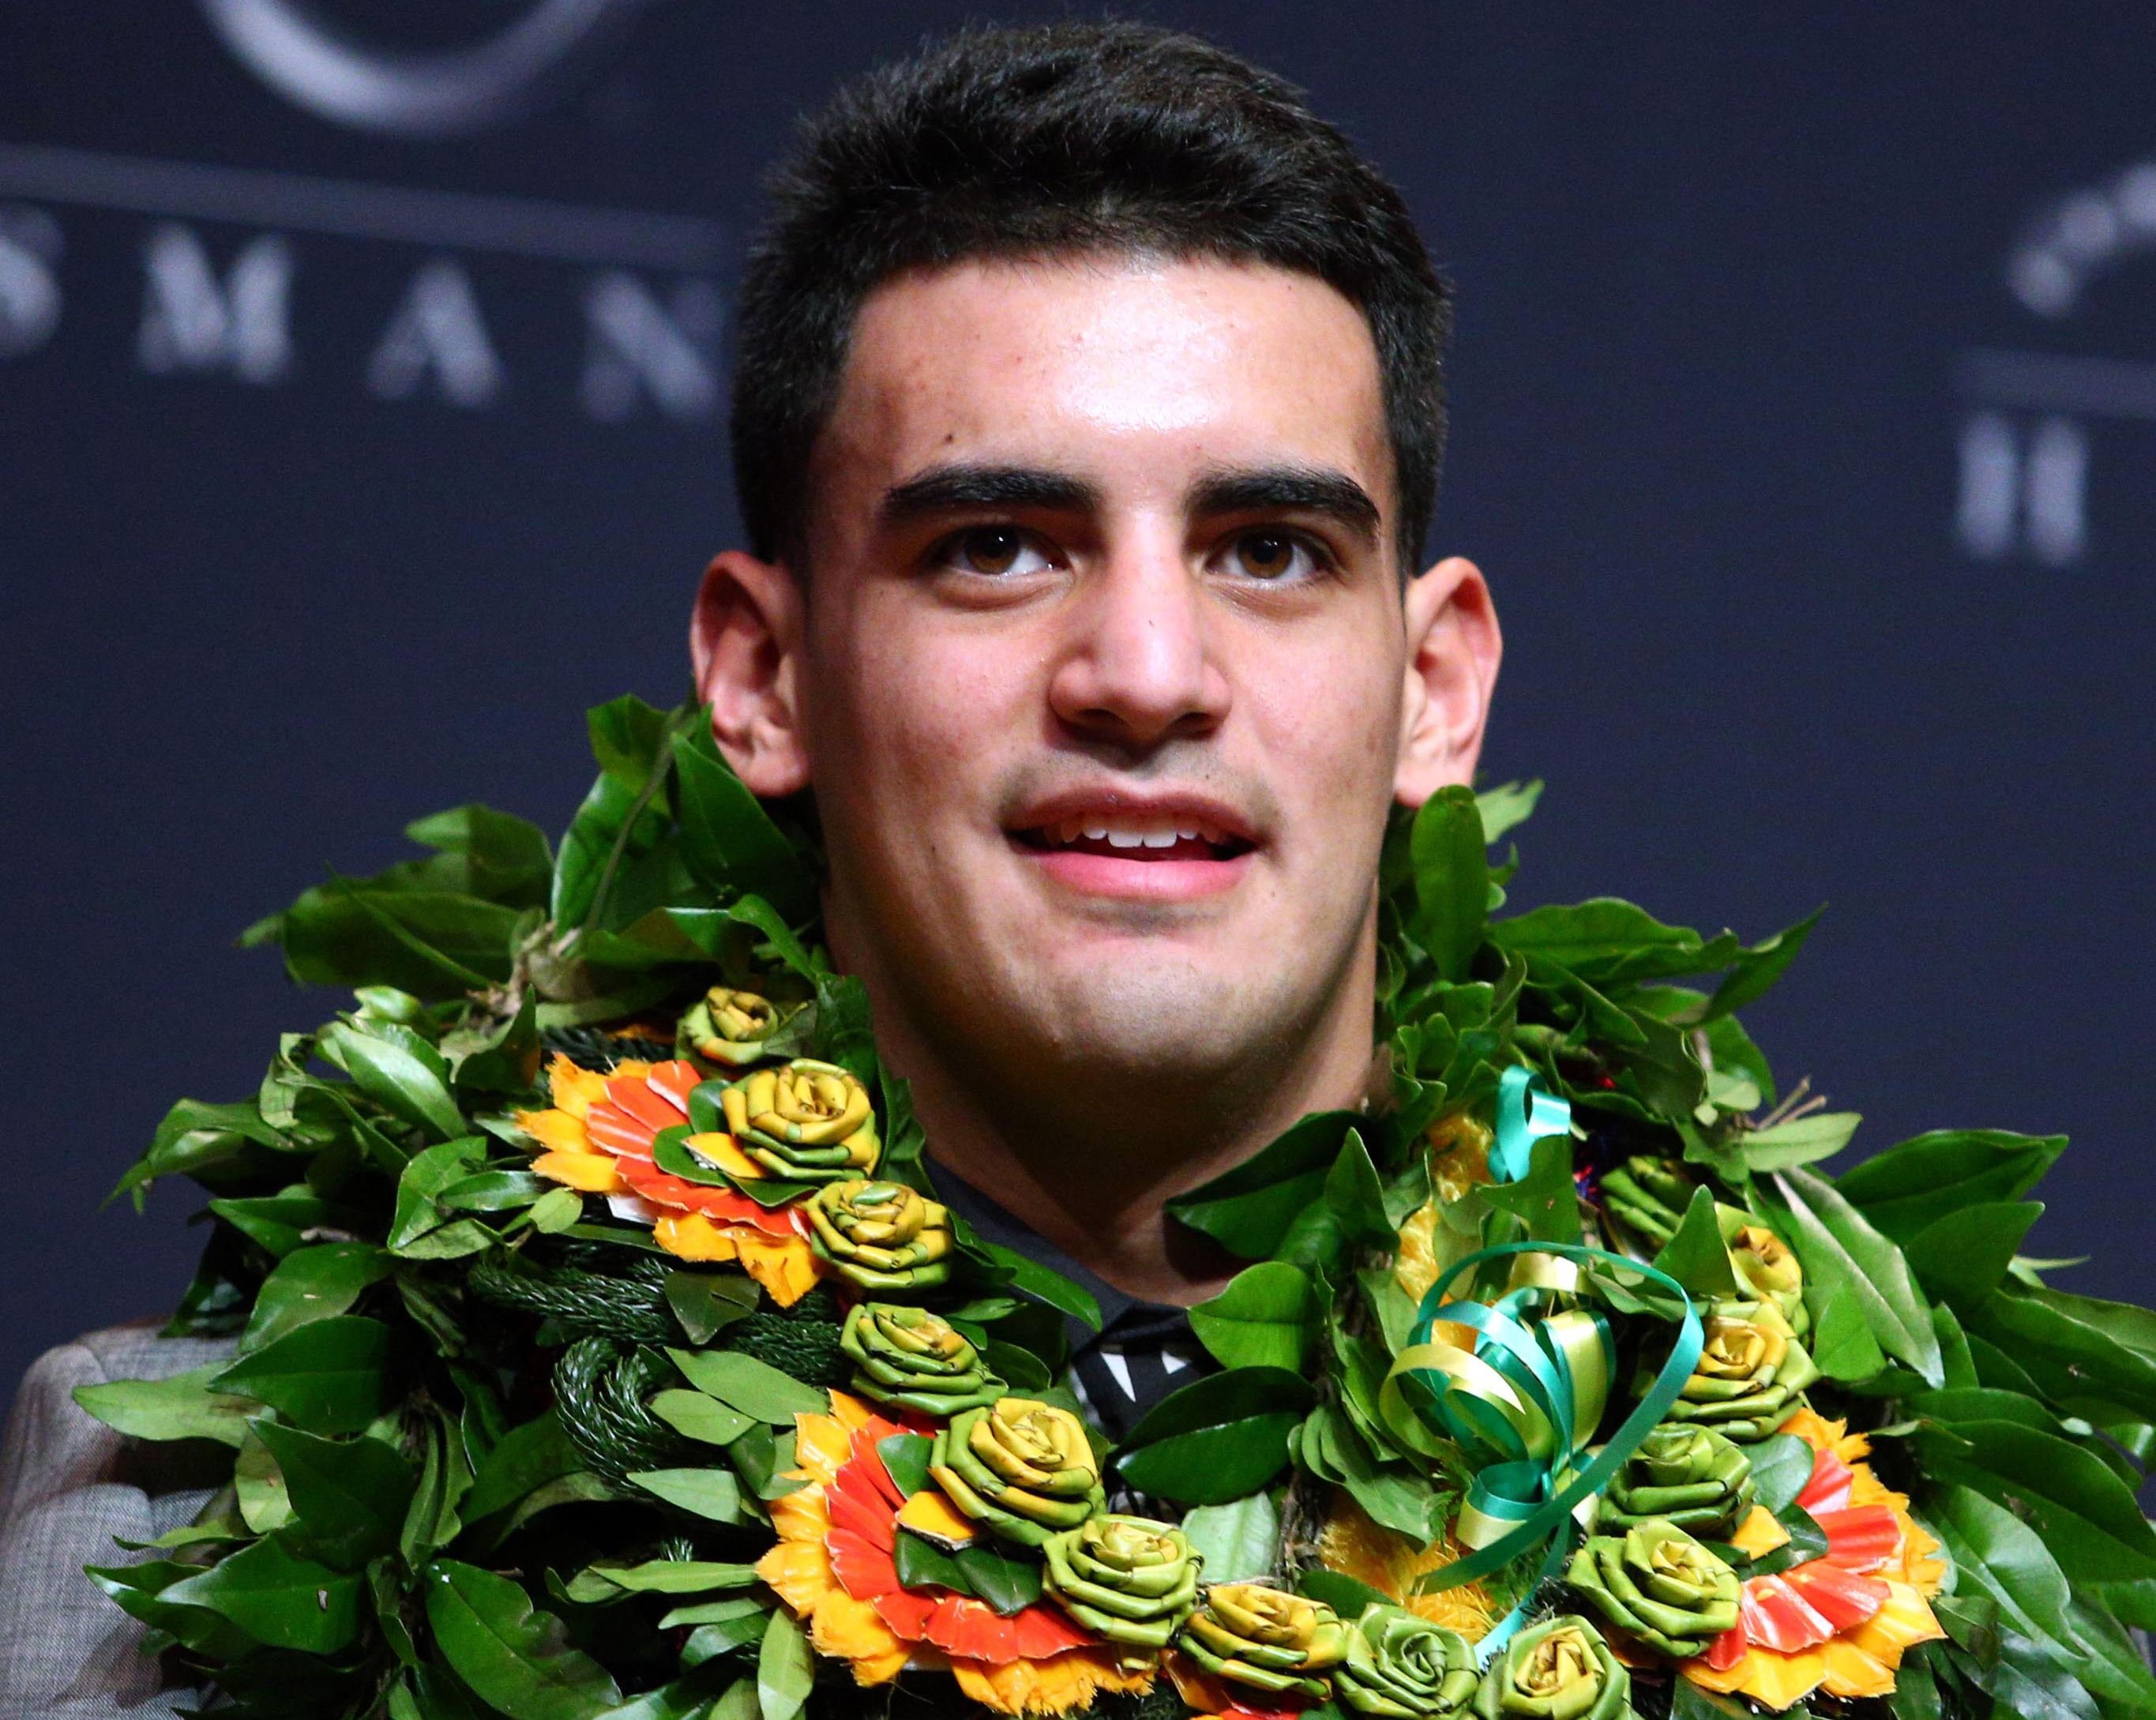 Oregon Ducks quarterback Marcus Mariota answers questions during a press conference after winning the Heisman Trophy